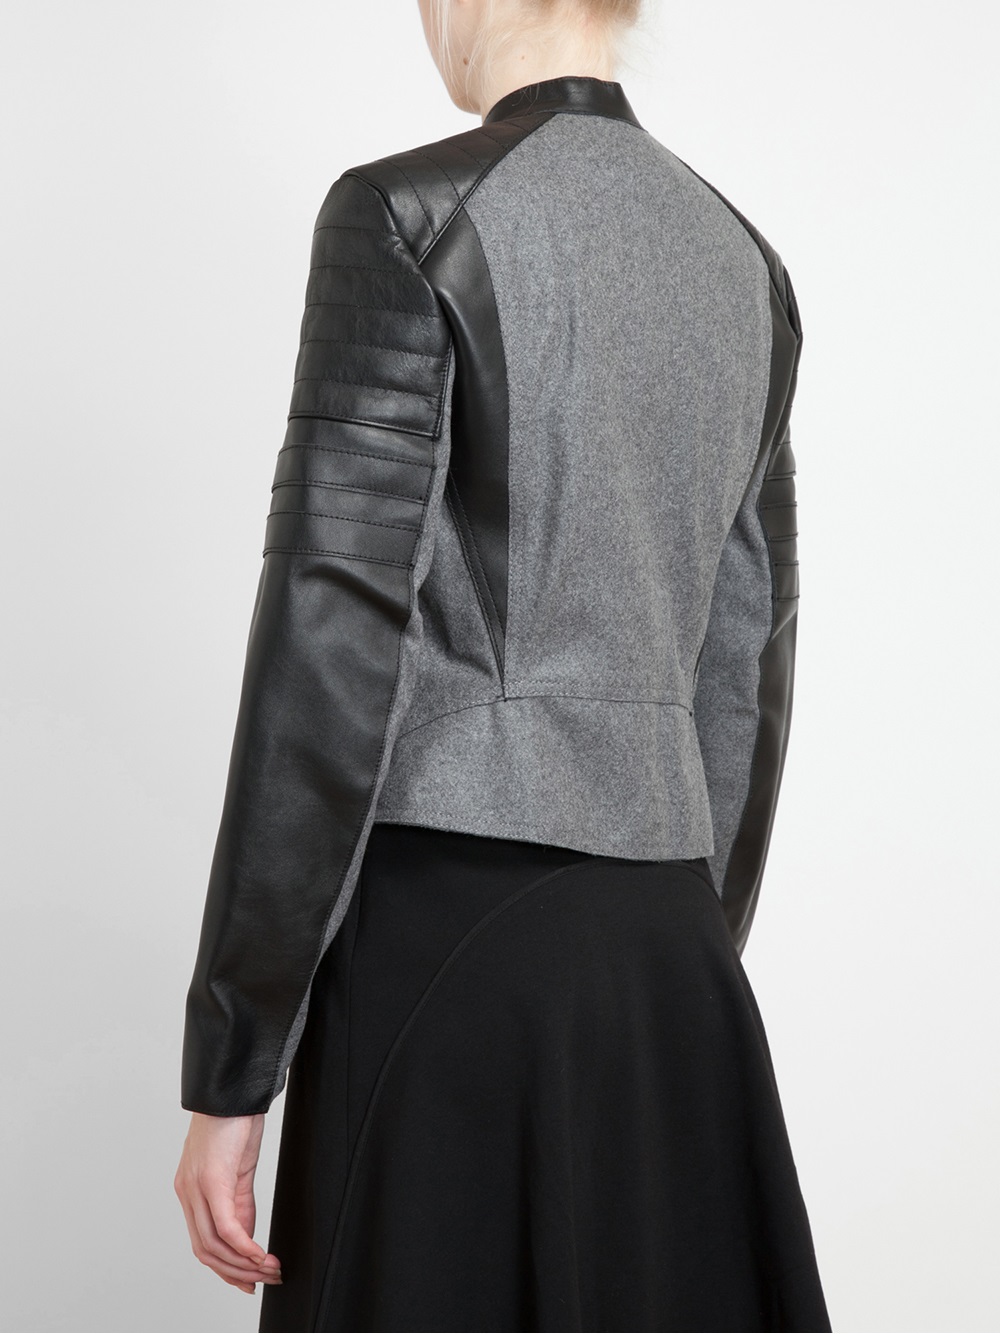 Lyst - 3.1 Phillip Lim 3.1 Phillip Lim Leather and Wool Biker Jacket in